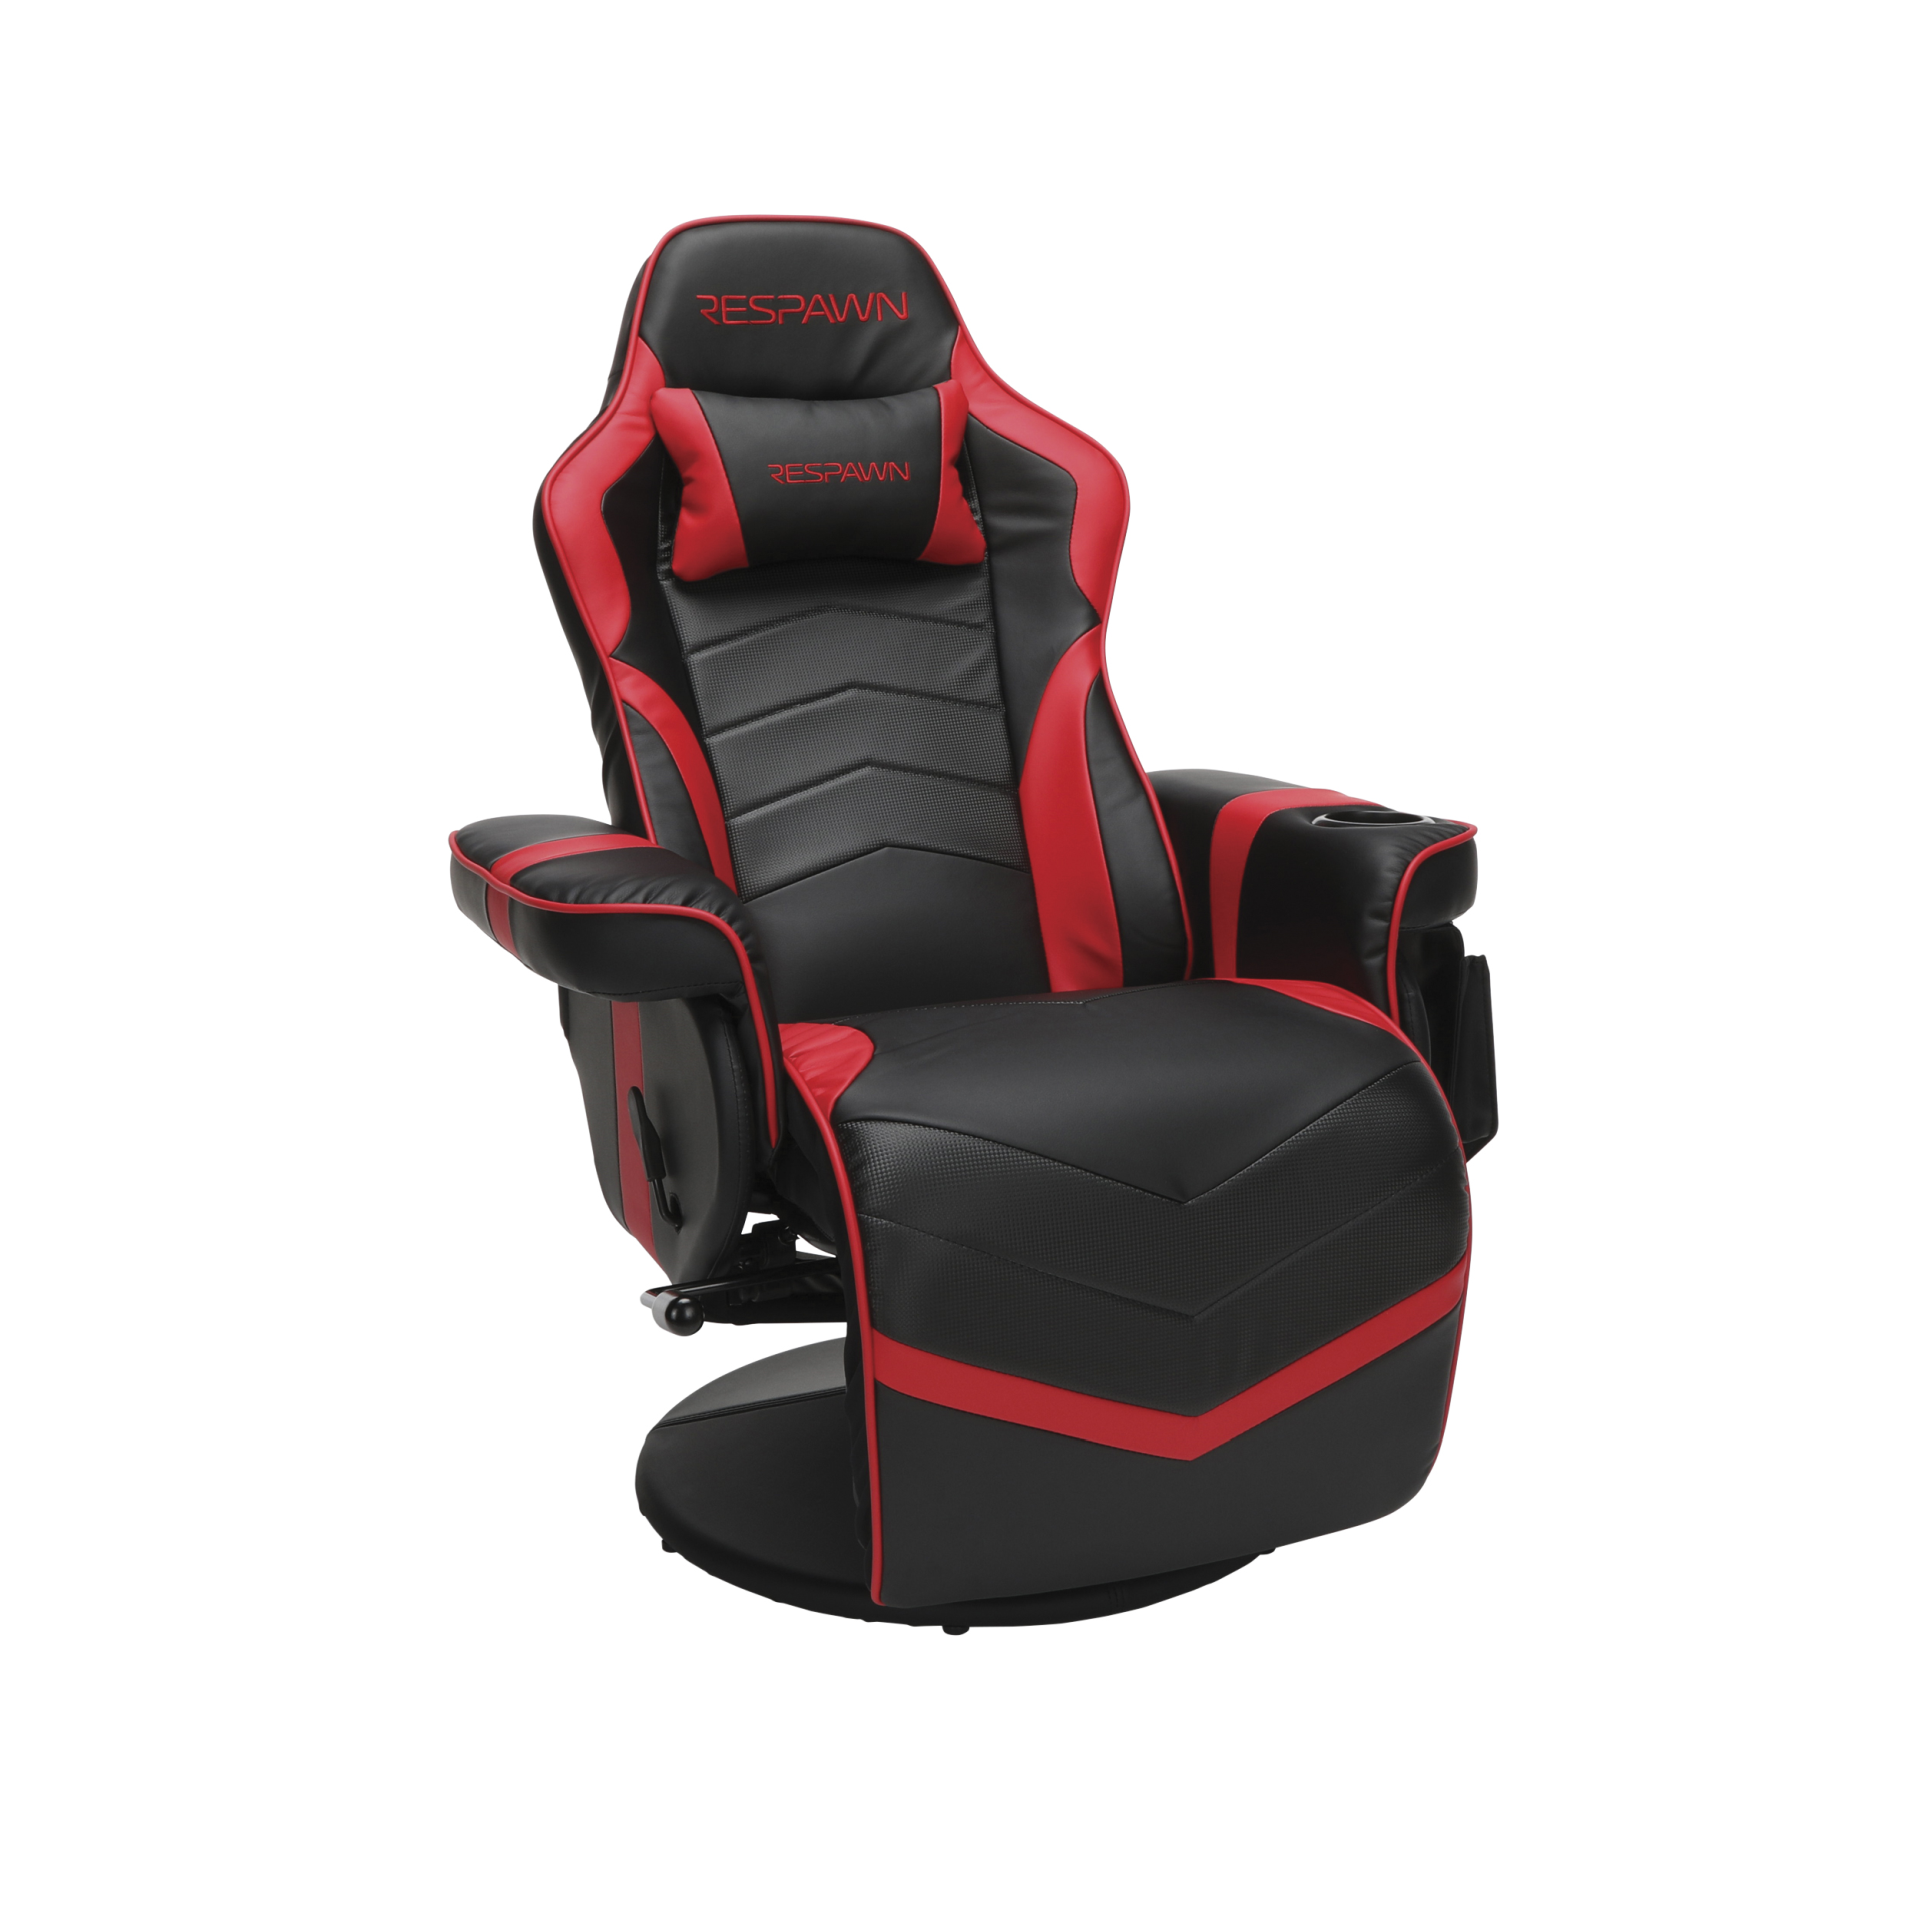 RESPAWN RSP-900 Gaming Recliner #25